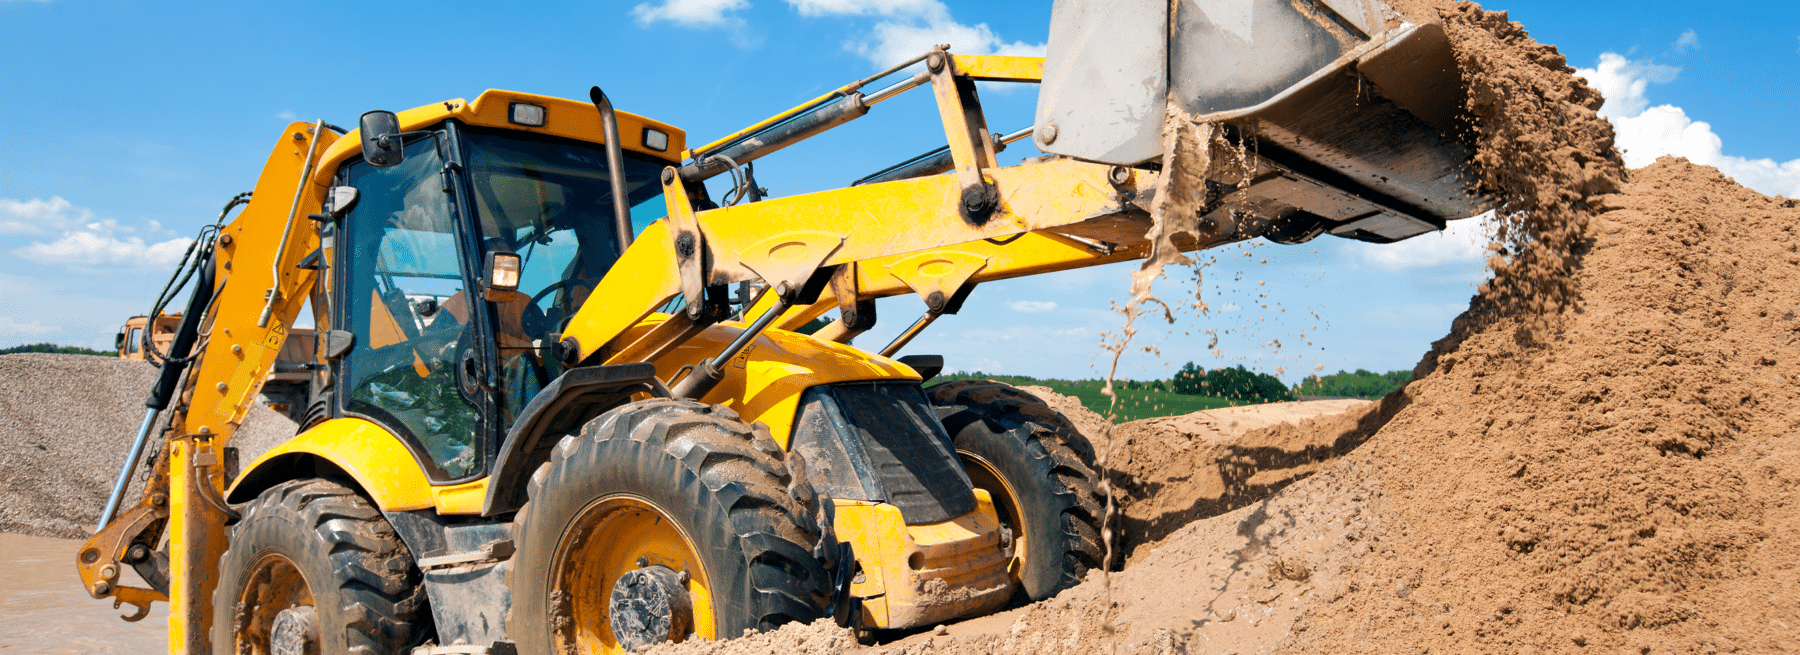 Top risks for heavy equipment safety